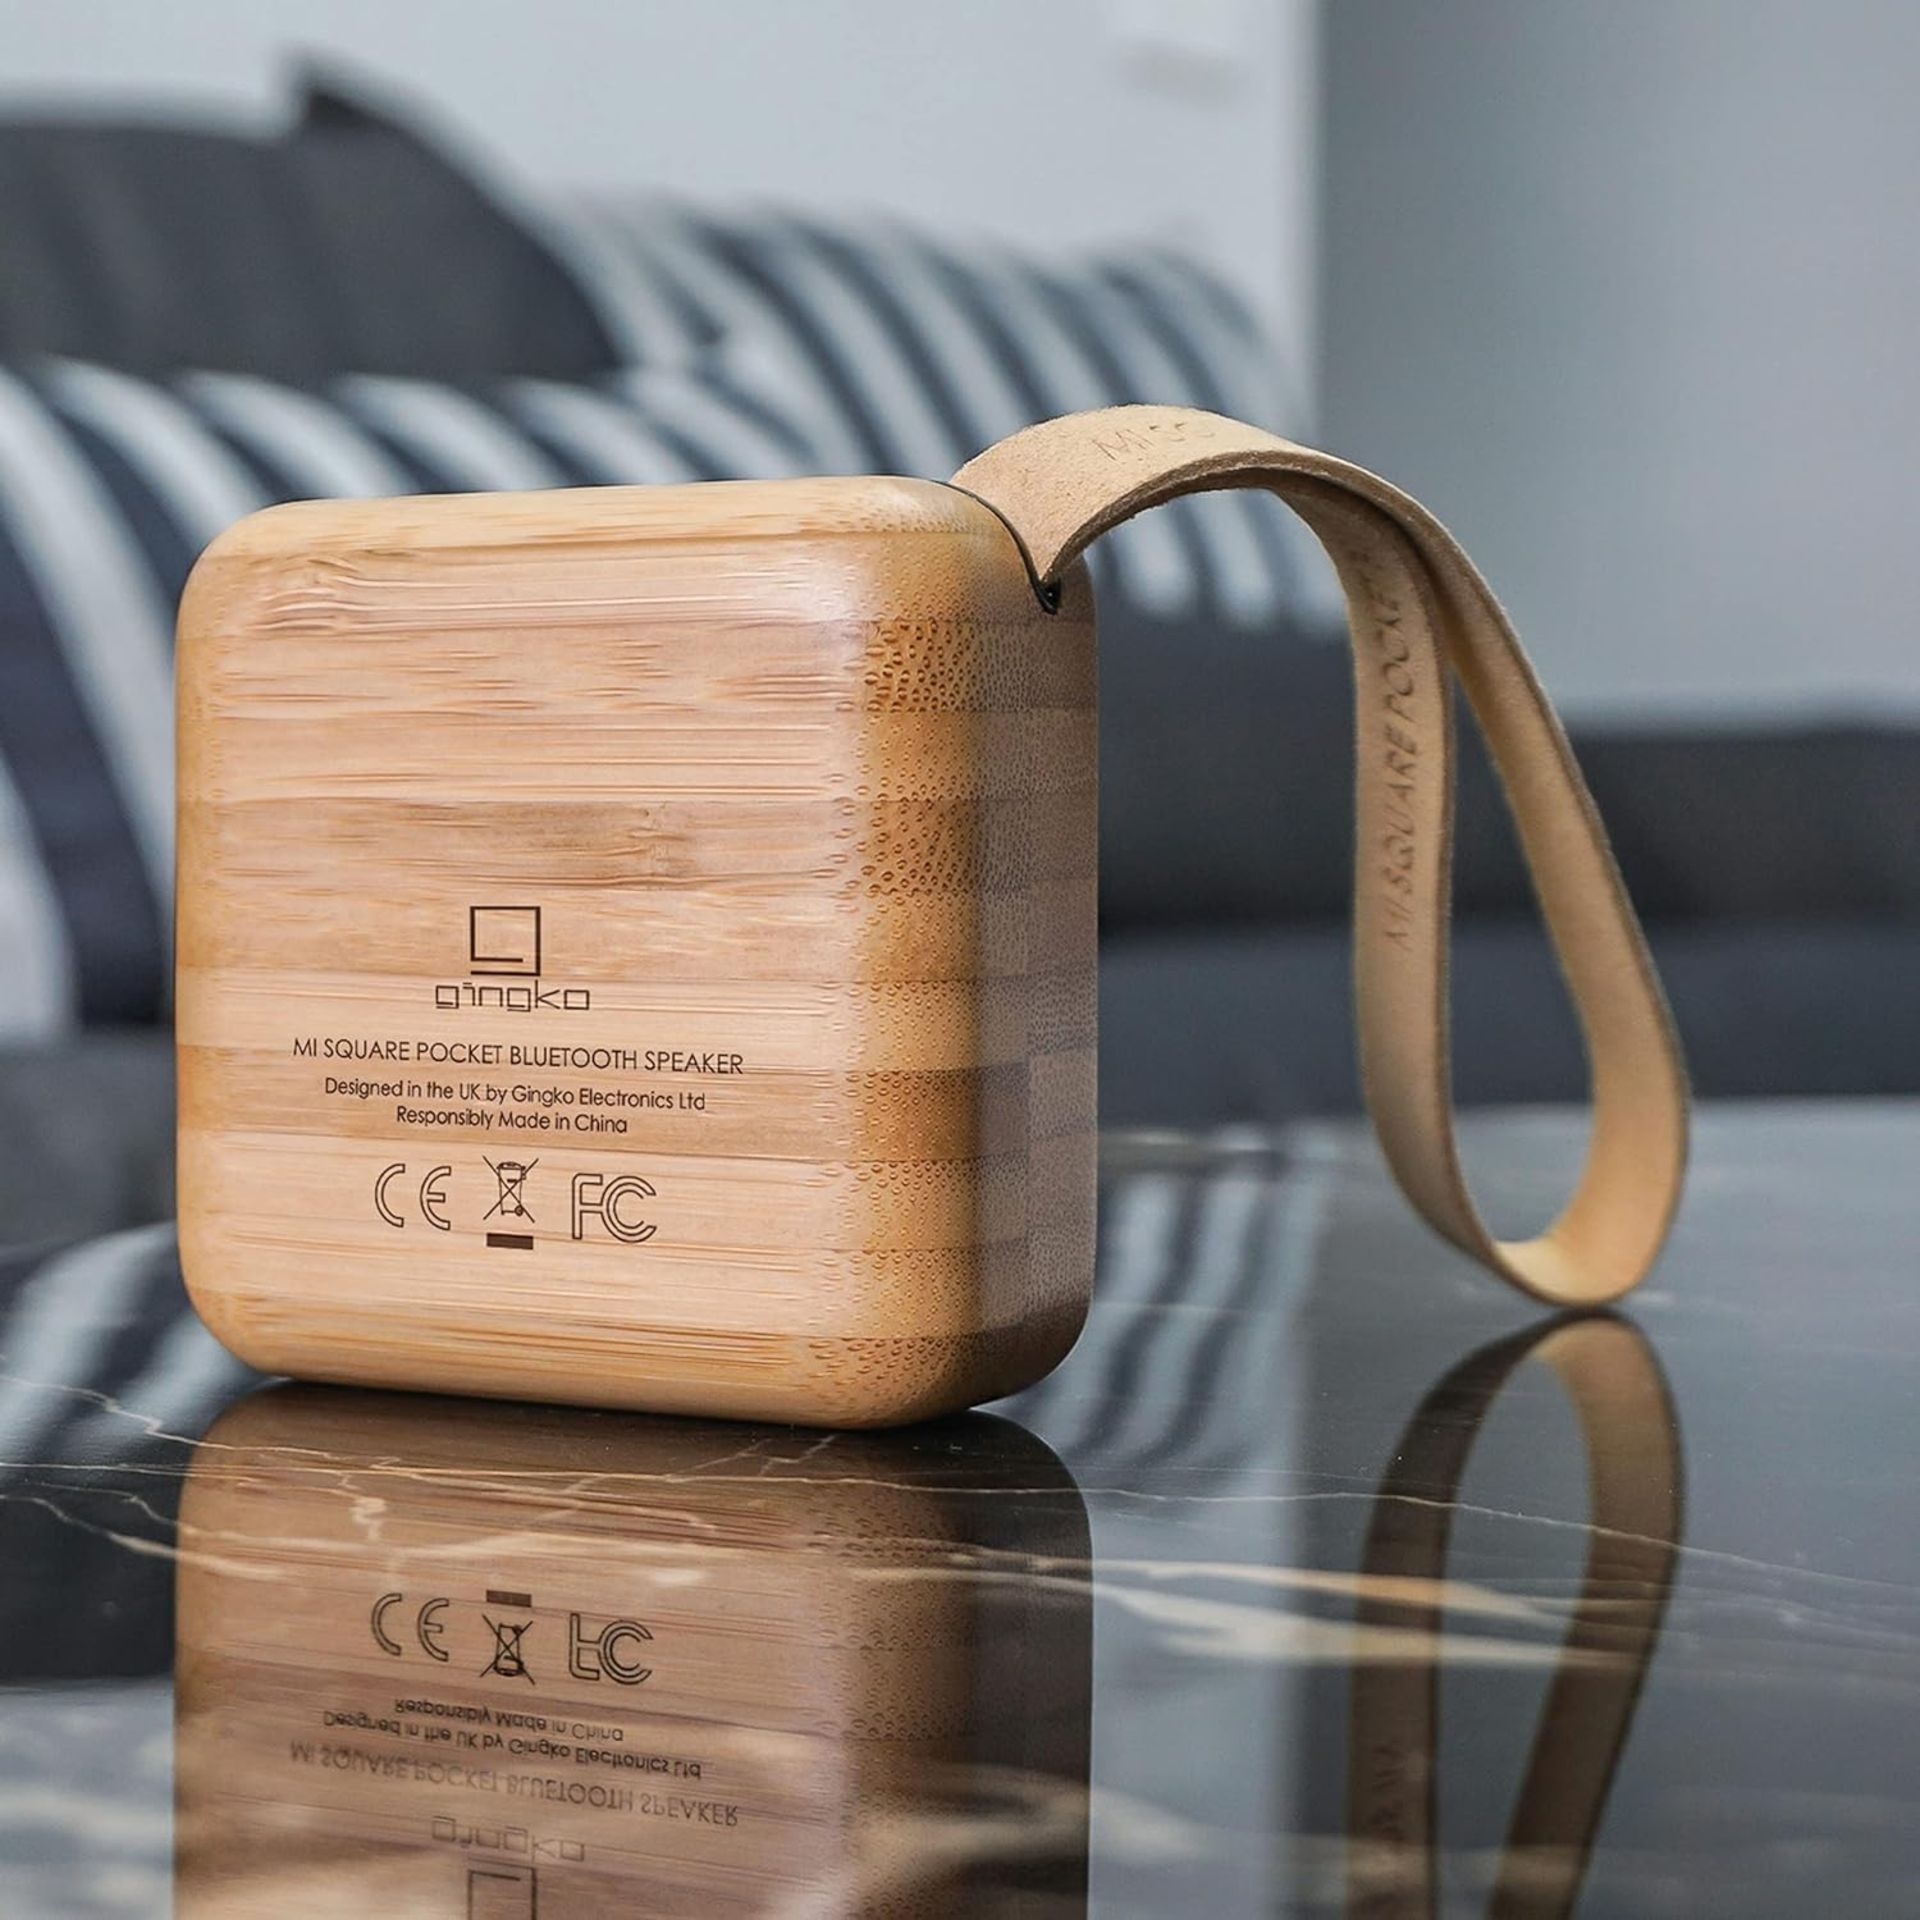 20 X NEW GINGKO MI SQUARE POCKET SOLID WOOD PORTABLE BLUETOOTH SPEAKER RECHARGEABLE BATTERY - Image 2 of 5